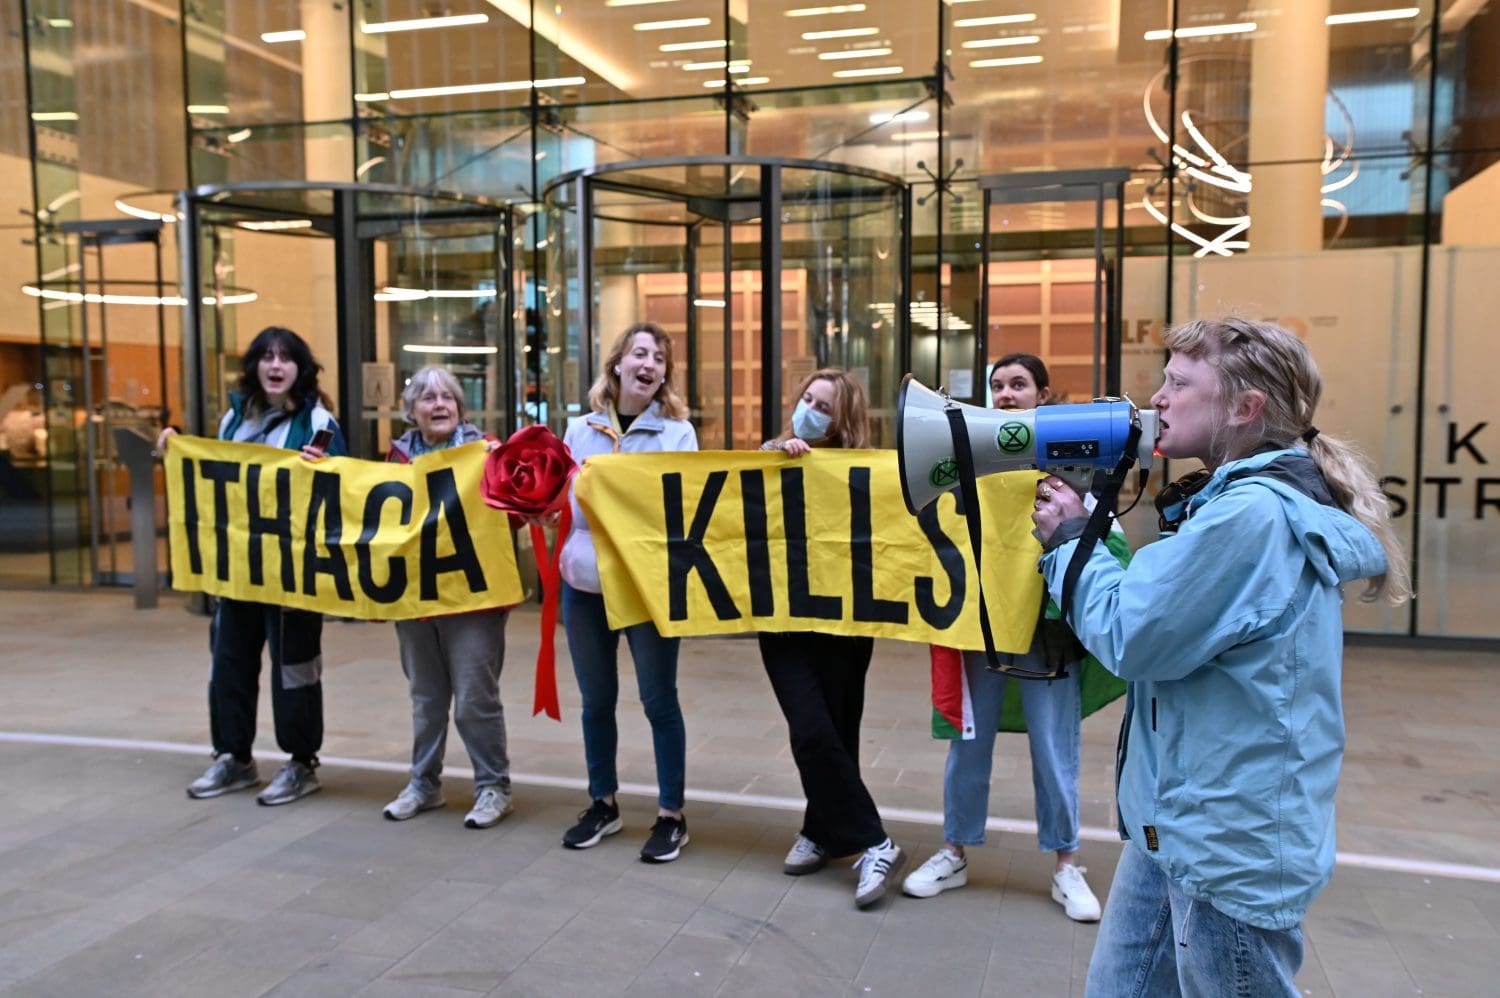 Fossil Free London protesters hold banners declaring "Ithaca Kills" while an activist marches with a megaphone in front.